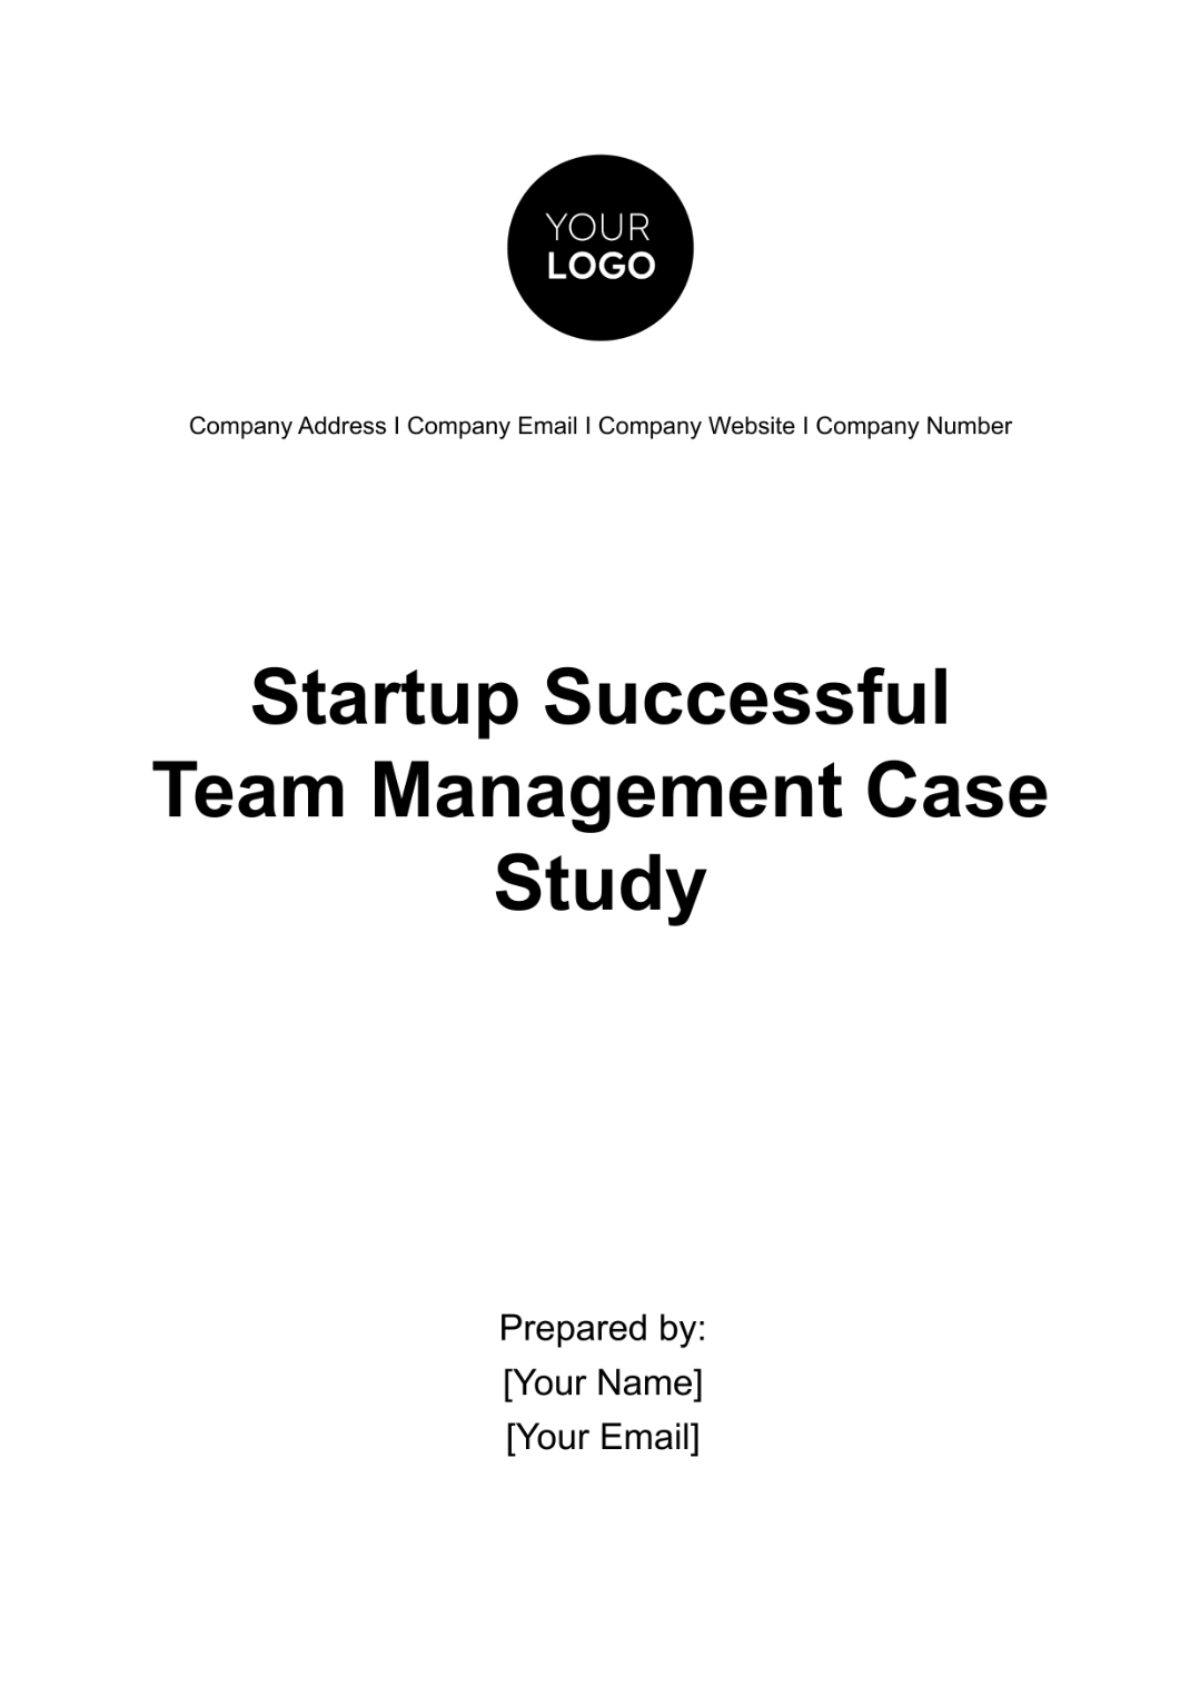 Startup Successful Team Management Case Study Template